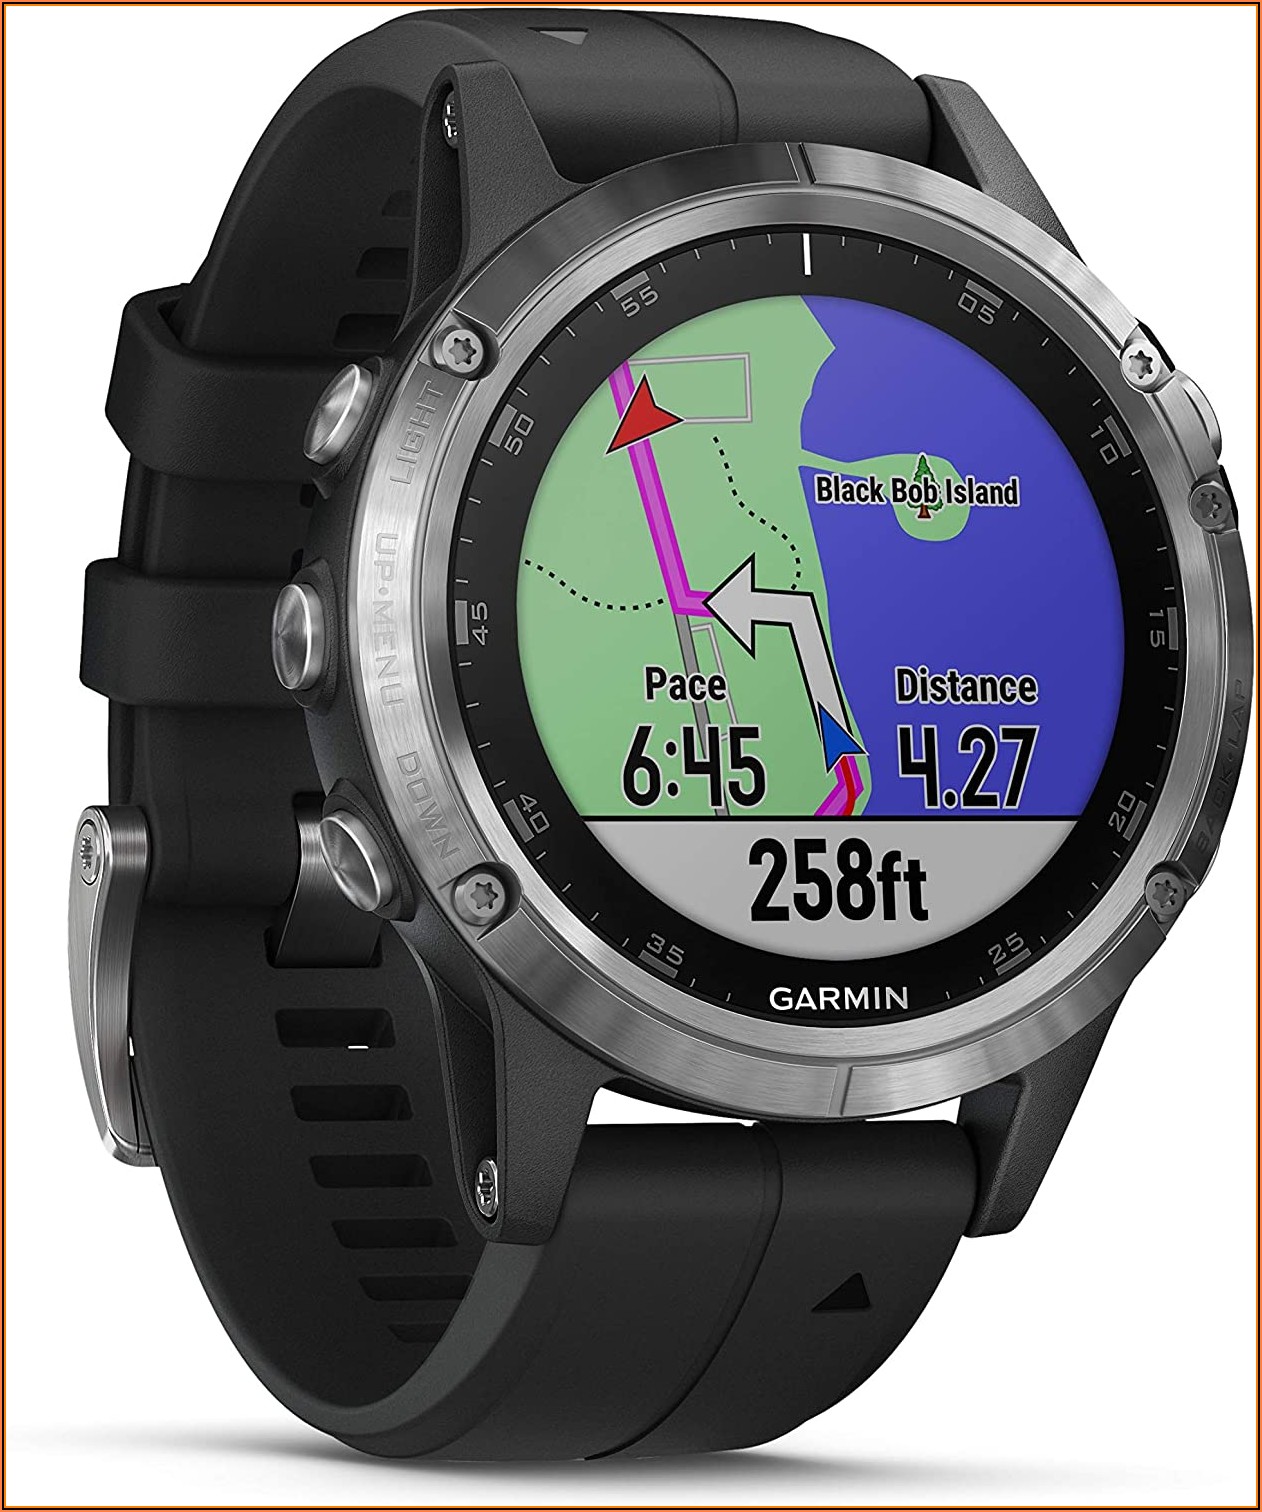 Best Gps Watch With Topo Maps